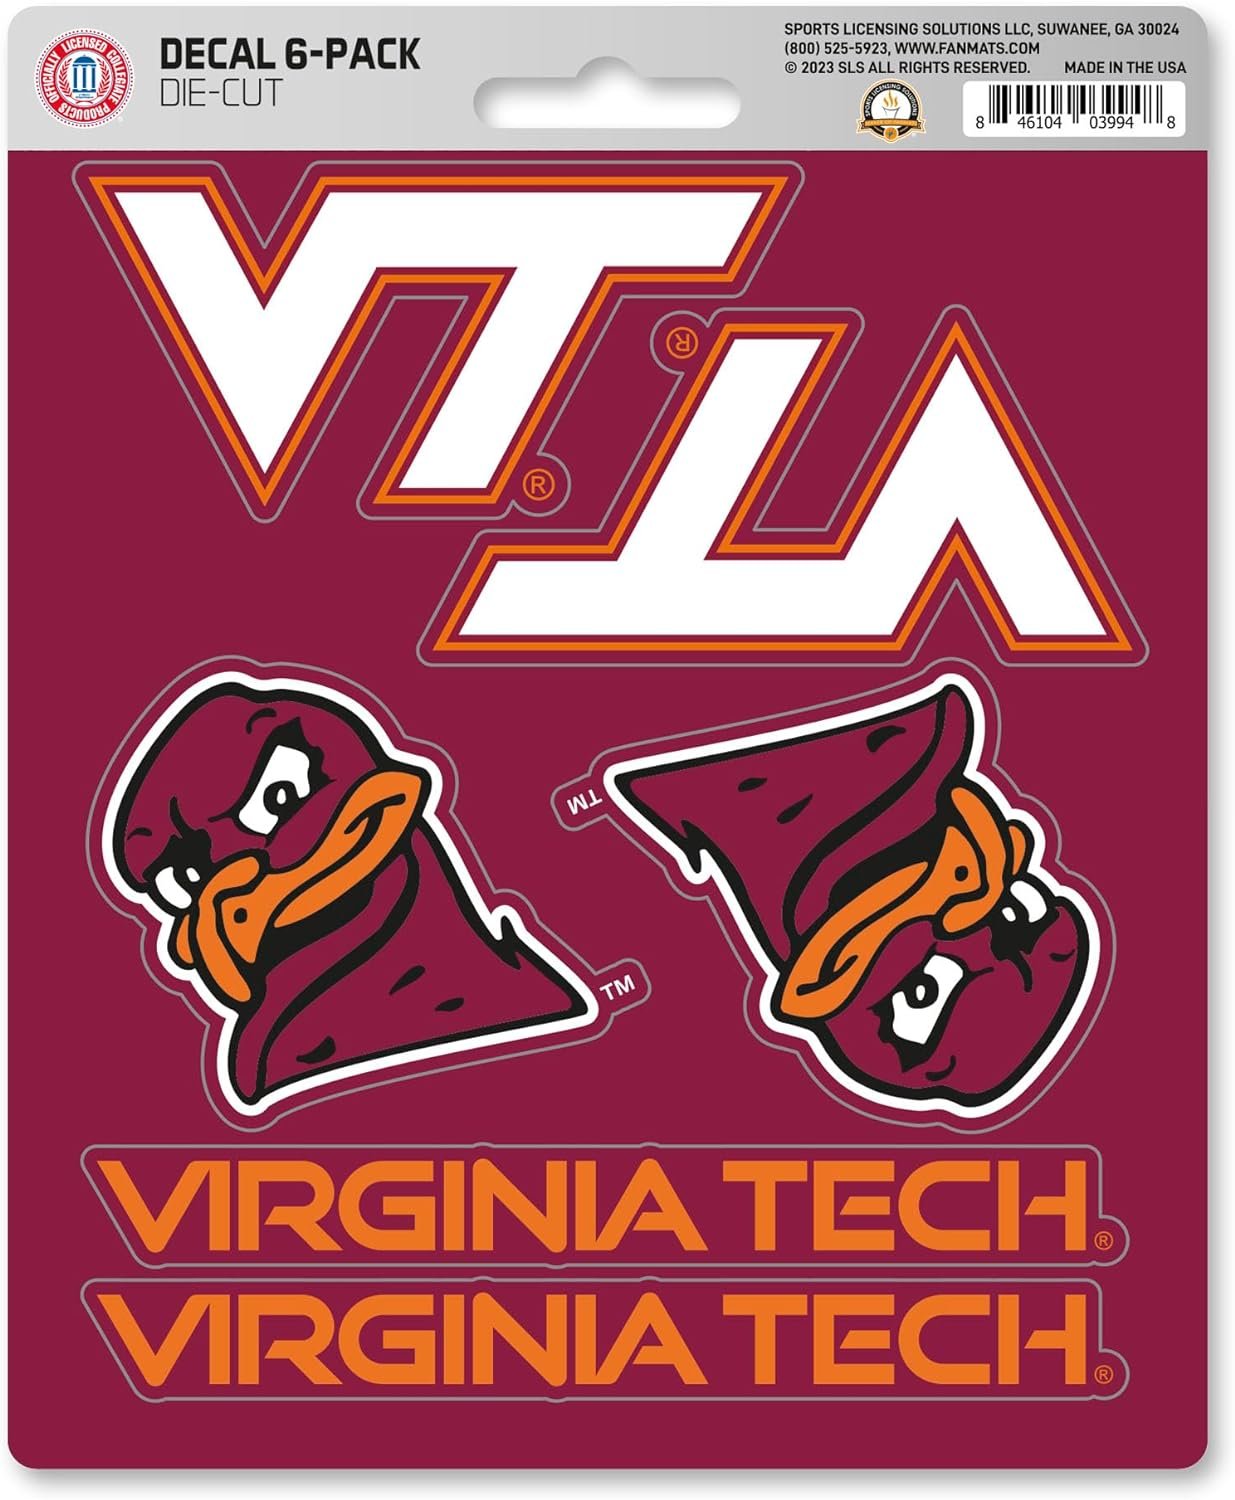 Virginia Tech Hokies 6-Piece Decal Sticker Set, 5x6 Inch Sheet, Gift for football fans for any hard surfaces around home, automotive, personal items